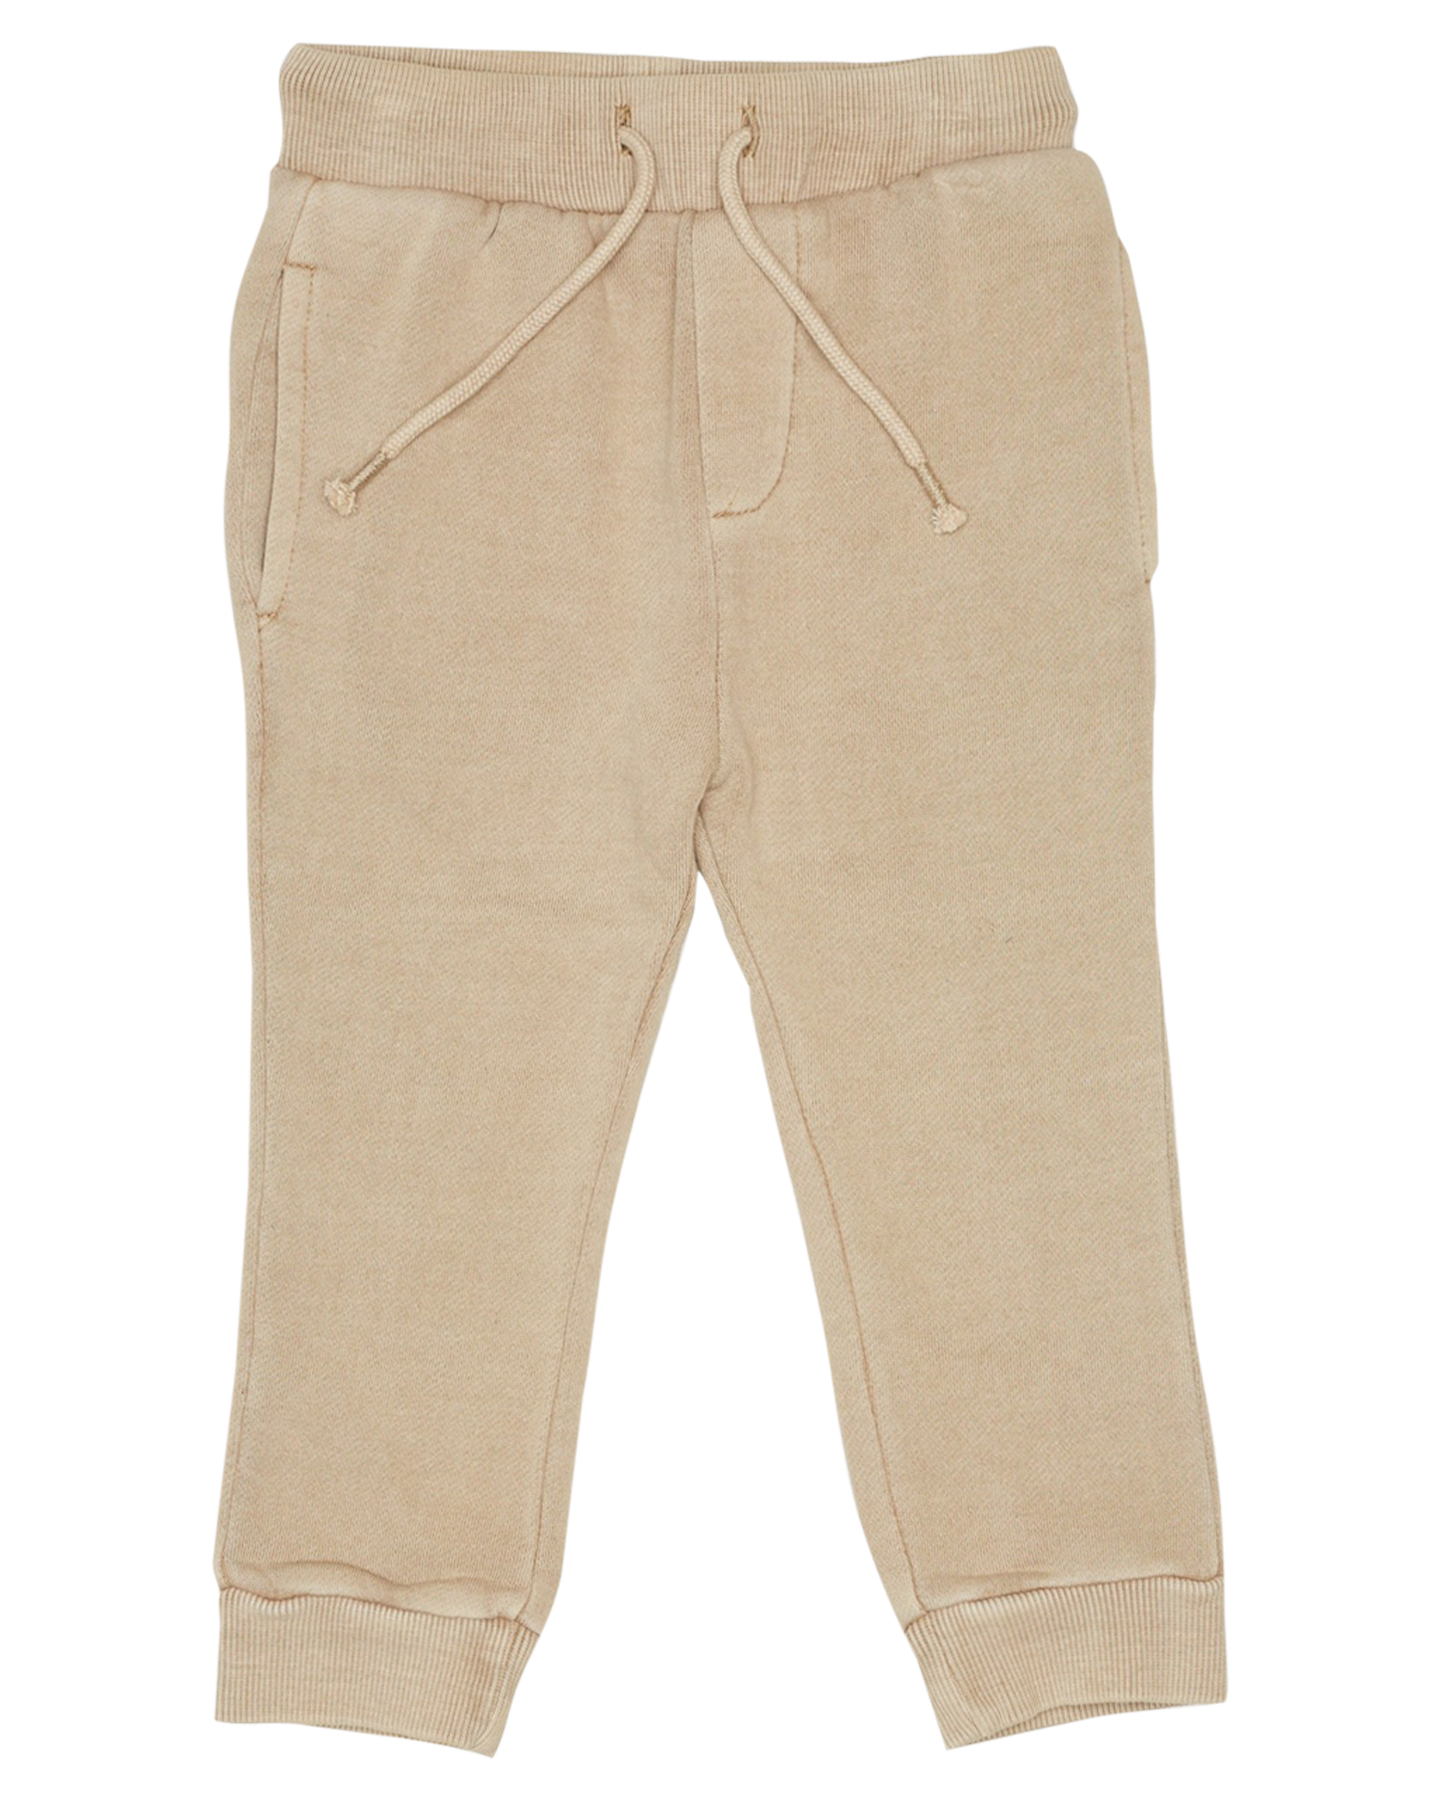 Animal Crackers Stand Out Pant - Kids - Tan | SurfStitch